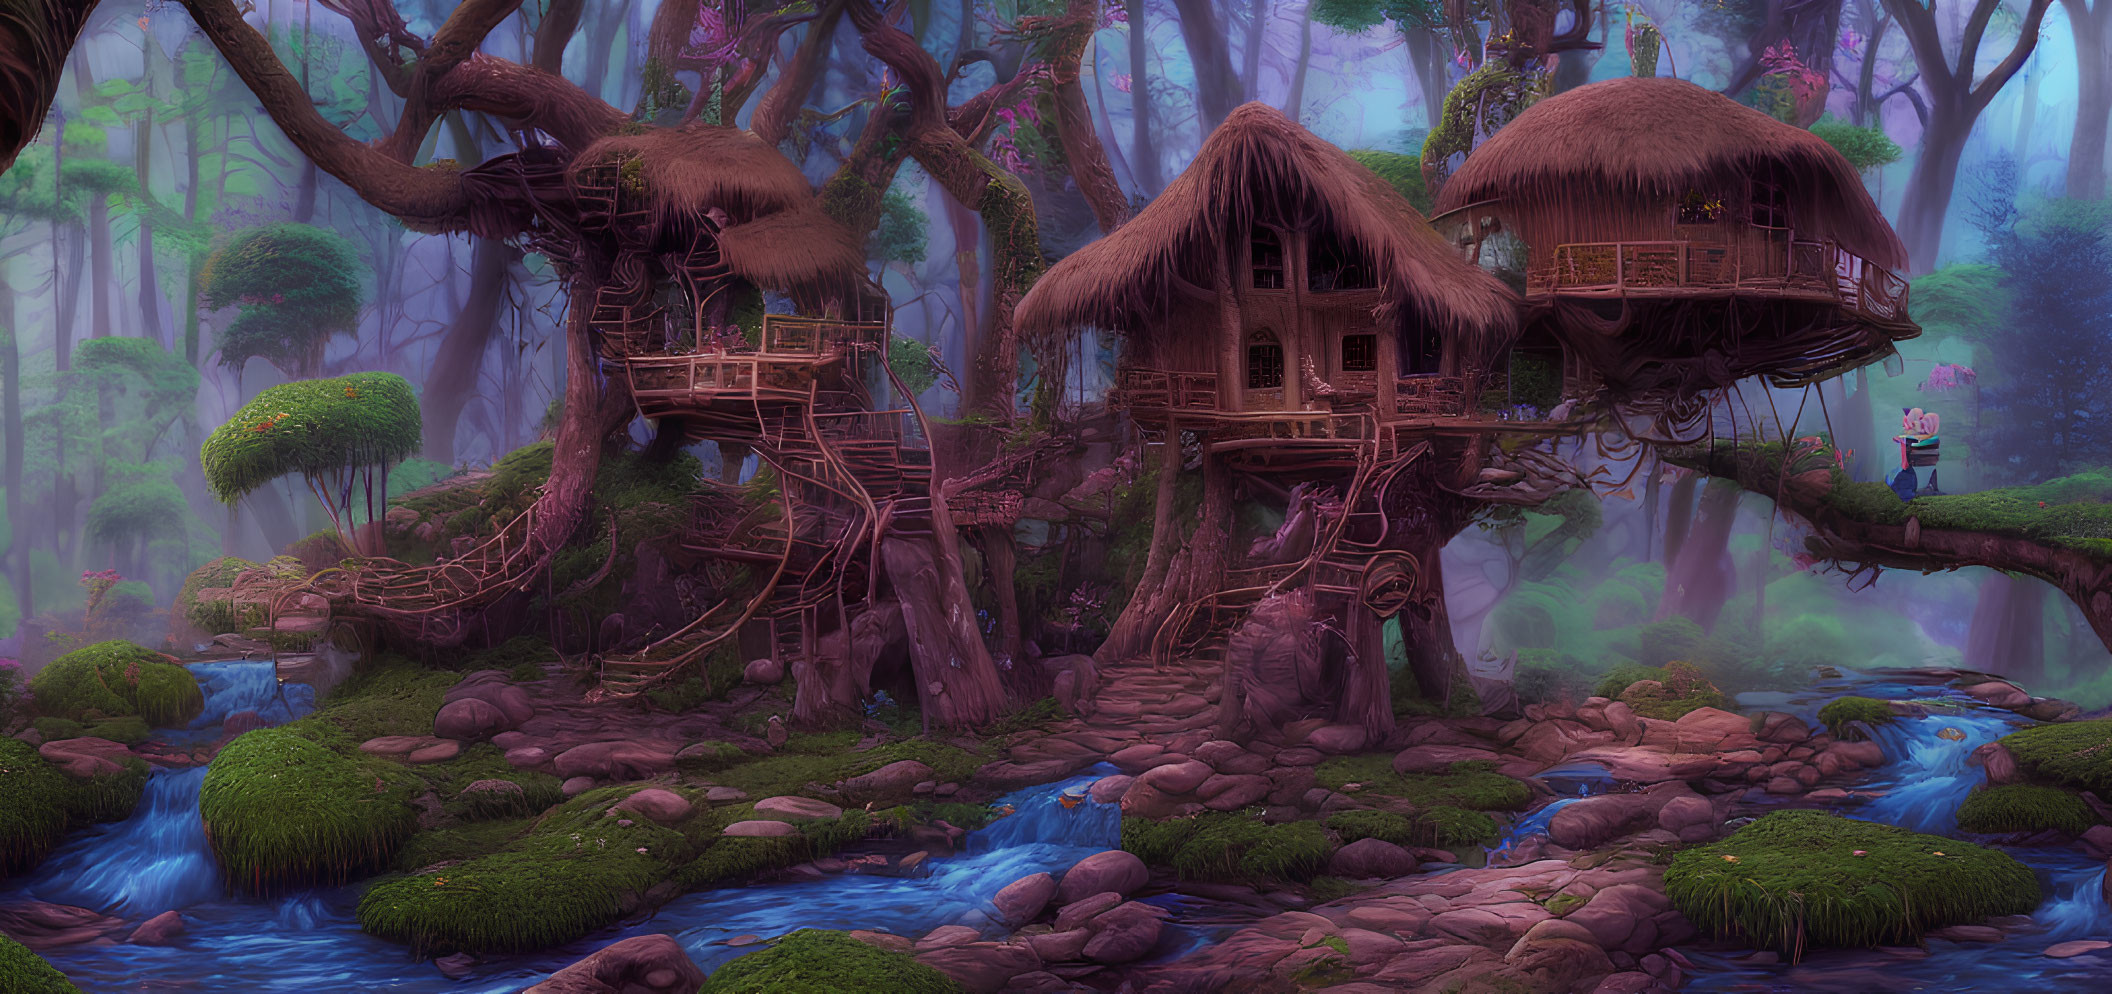 Thatched Roof Fantasy Tree Houses in Foggy Forest